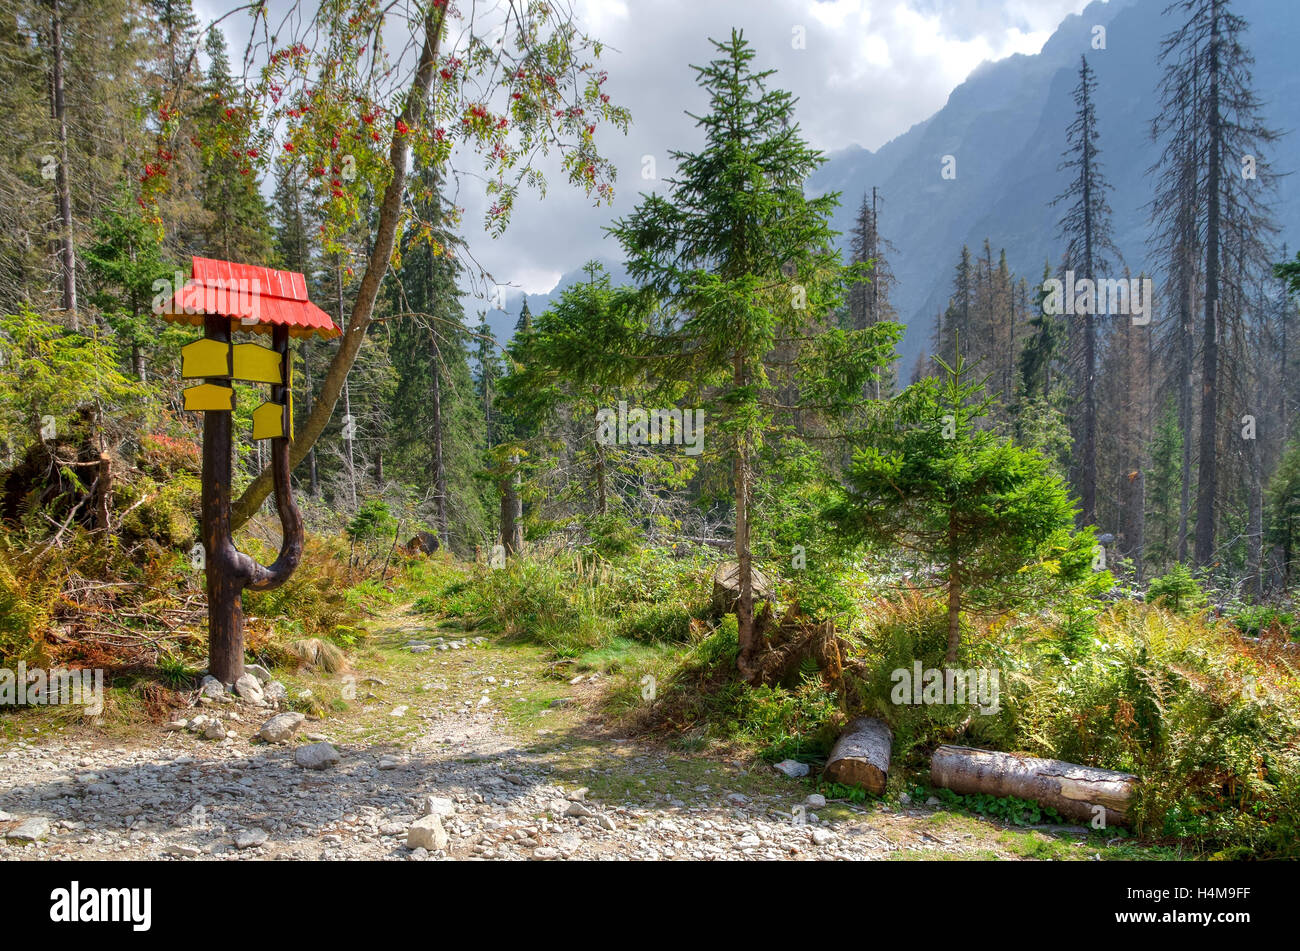 Sign indicating the trails in a beautiful mountain scenery. Stock Photo